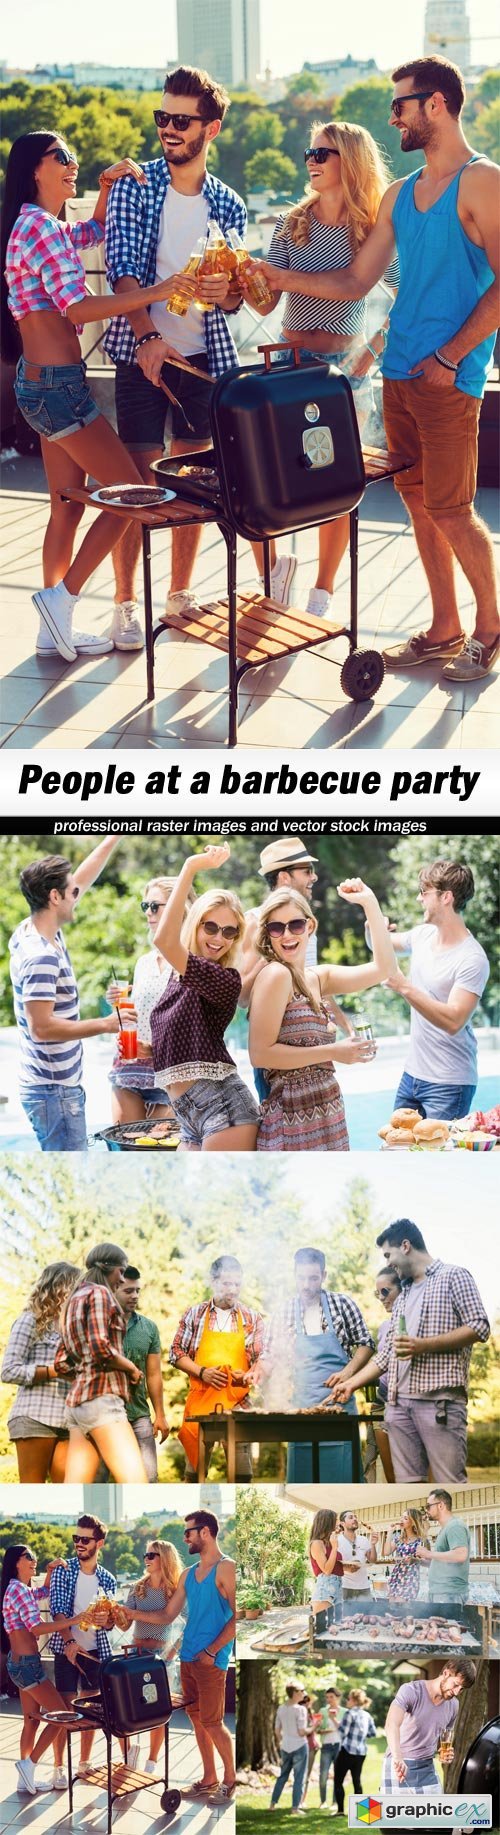 People at a barbecue party - 5 UHQ JPEG